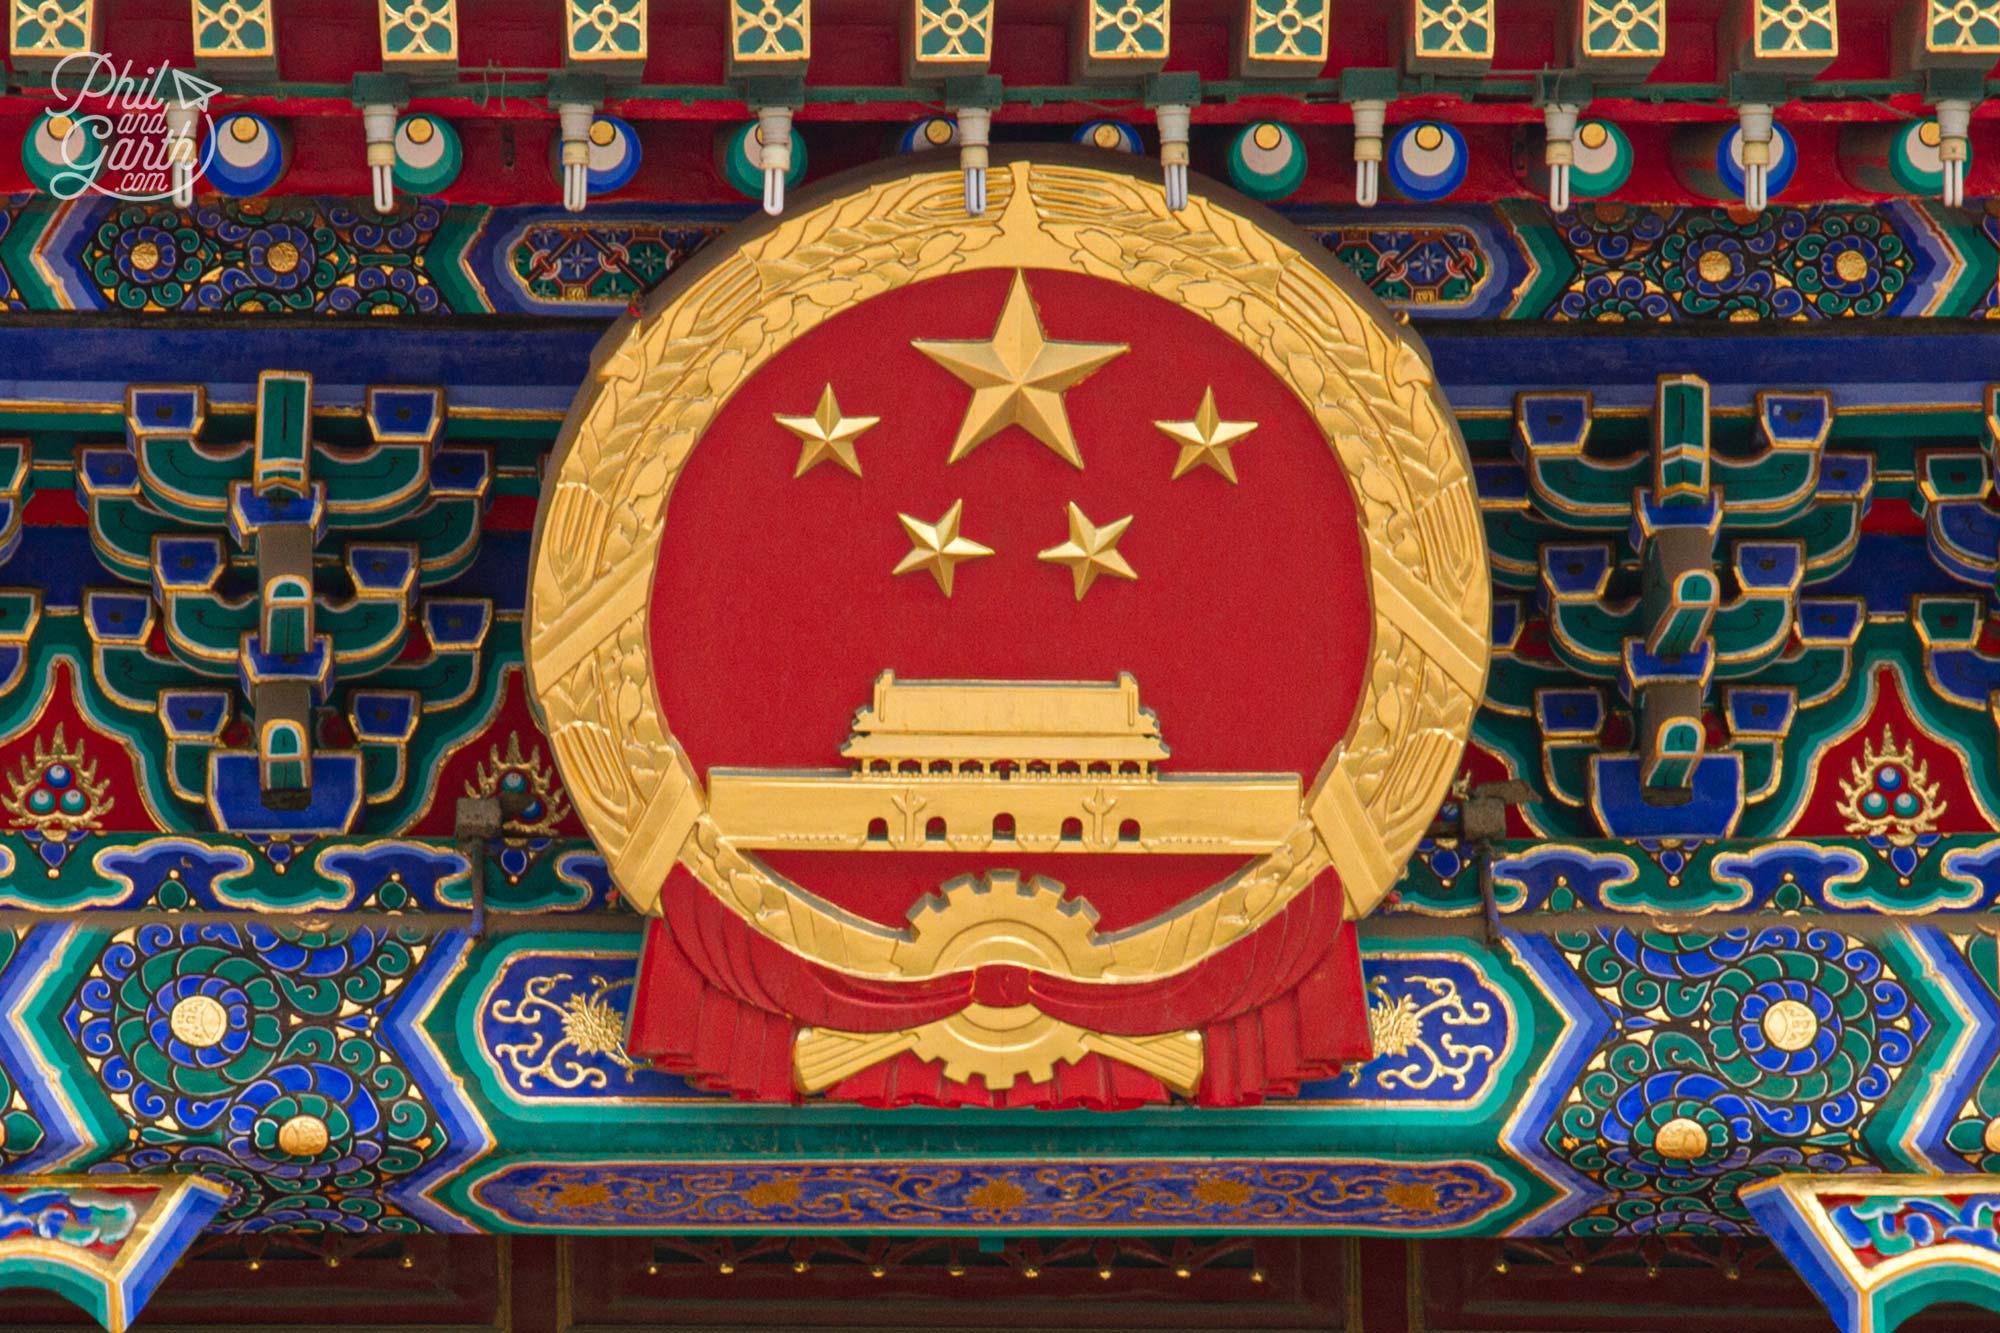 Tiananmen features on the symbol of the People's Republic of China